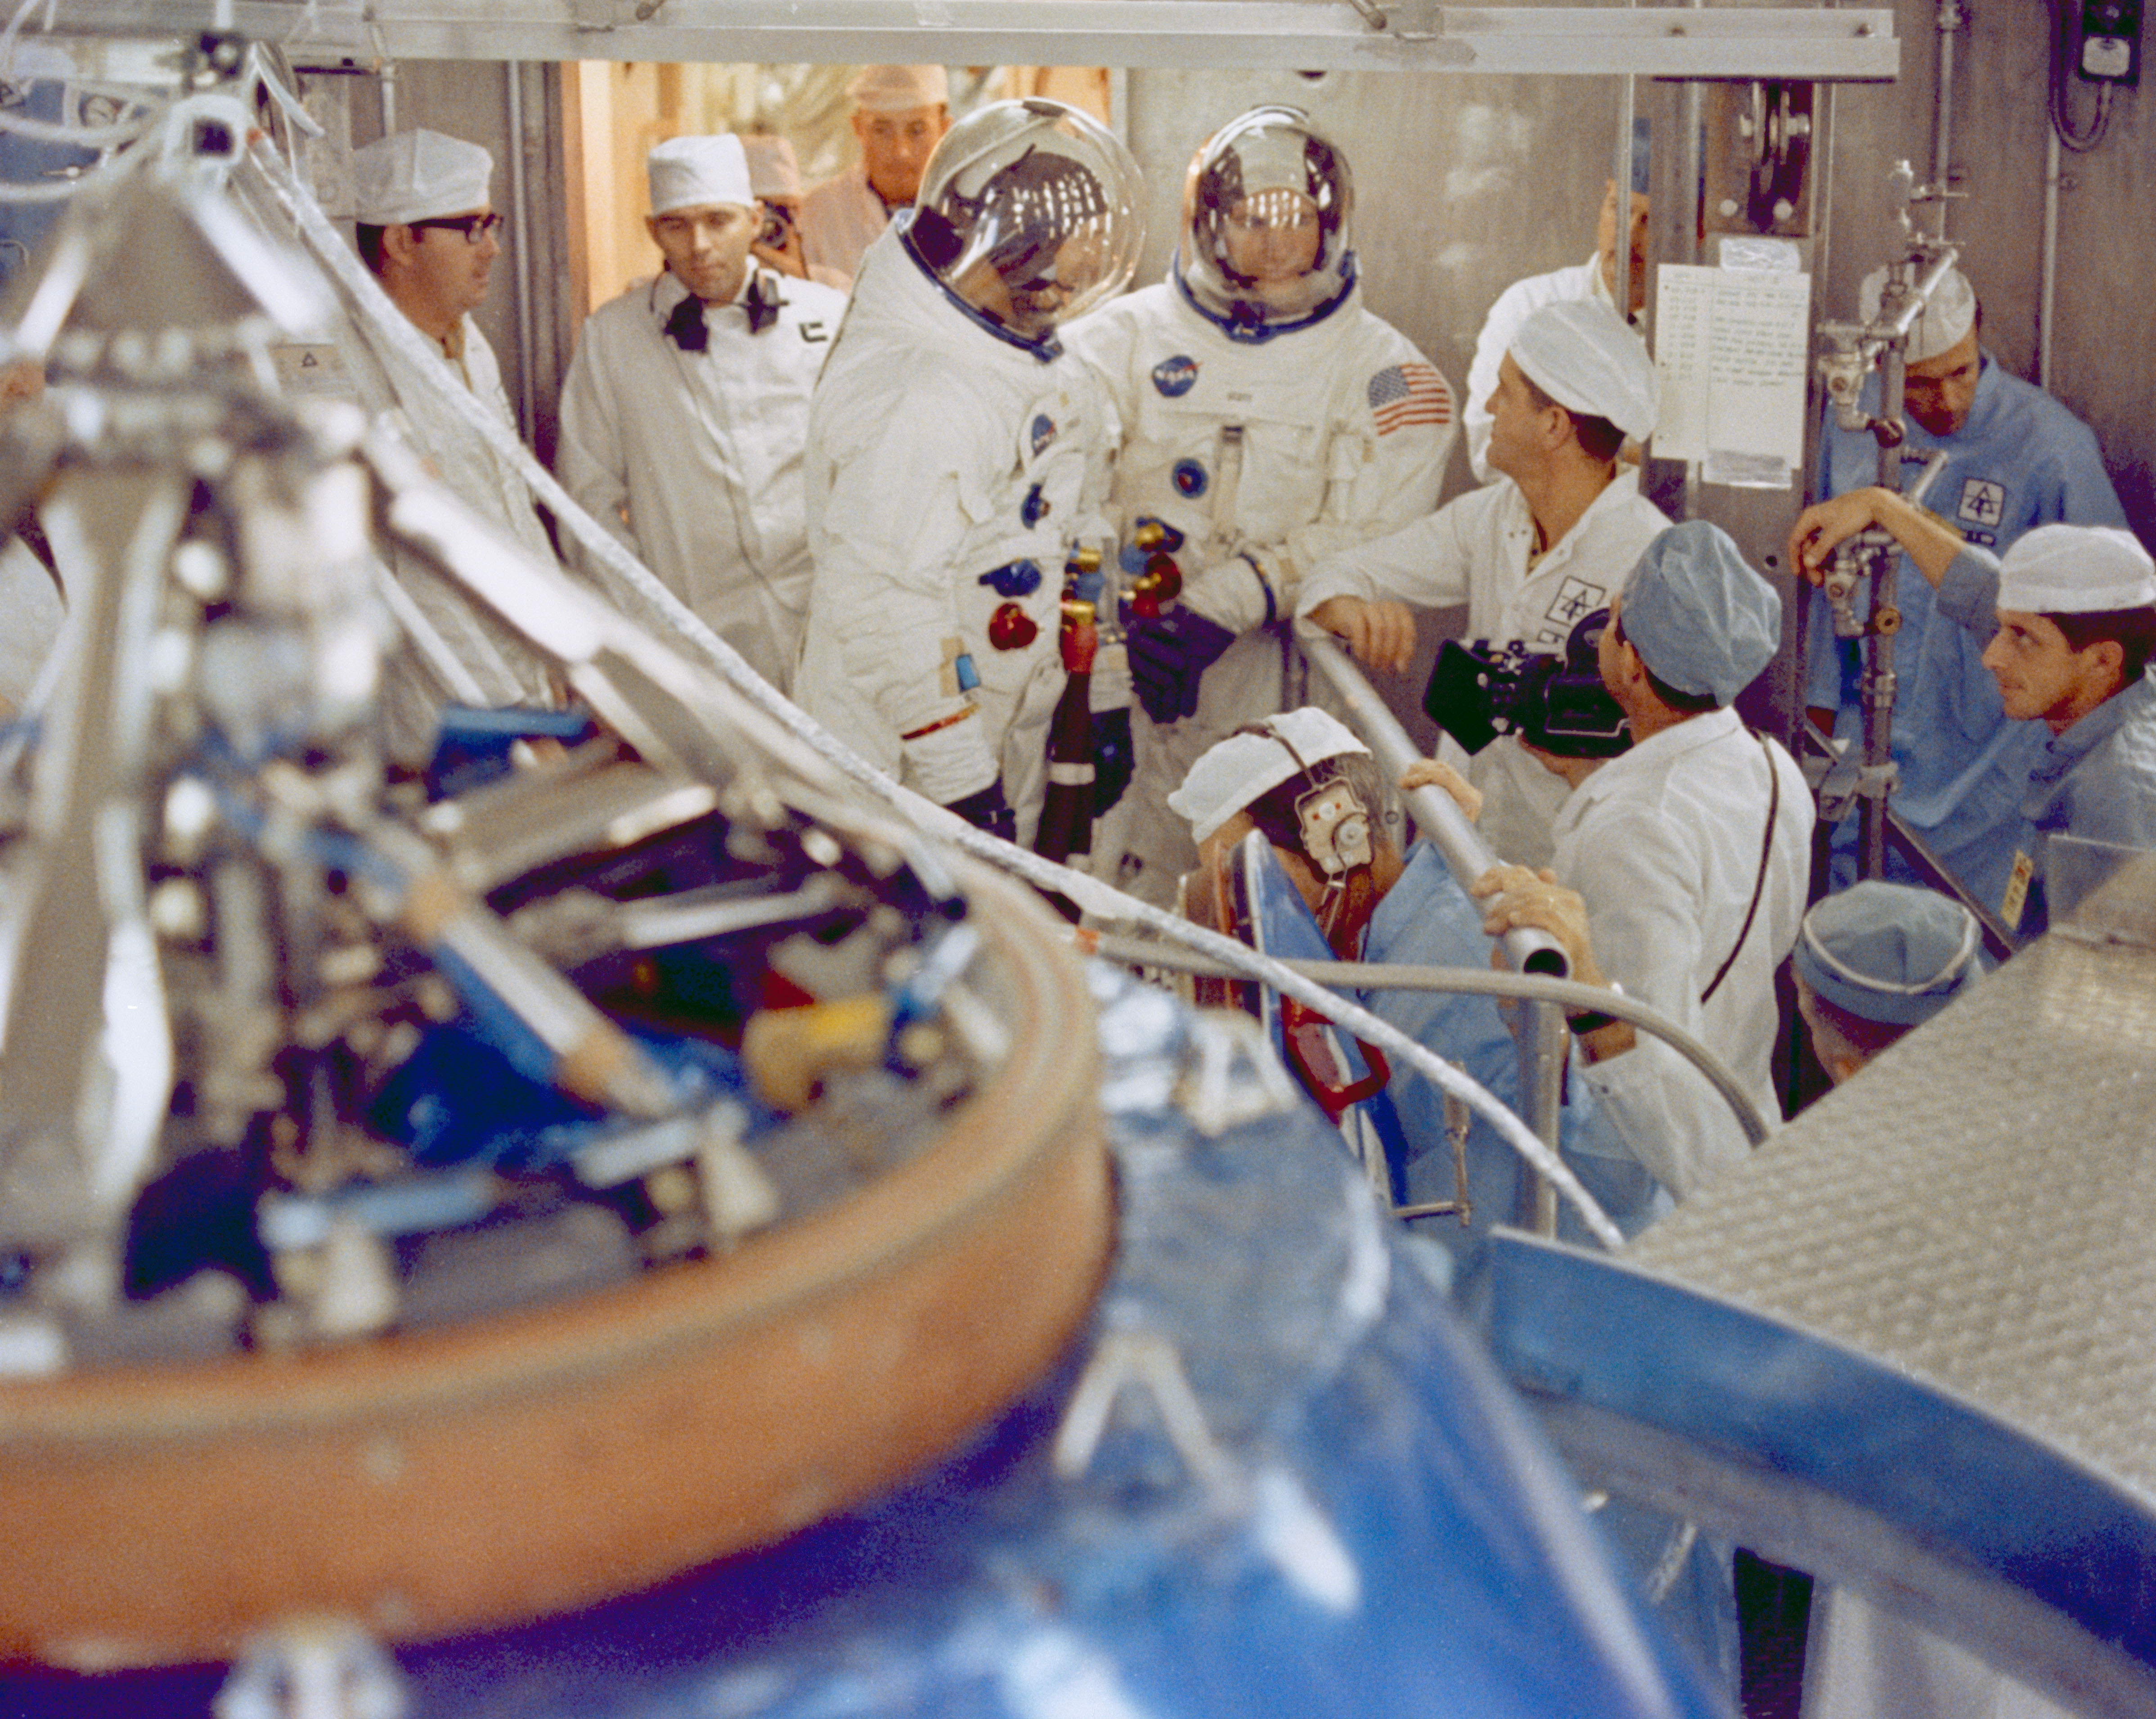 Photo of The Apollo 9 prime crew of James A. McDivitt, left, David R. Scott, and Russell L. Schweickart, not pictured, prepares for an altitude chamber test of their Command Module (CM) in the Manned Spacecraft Operations Building at NASA’s Kennedy Space Center in Florida